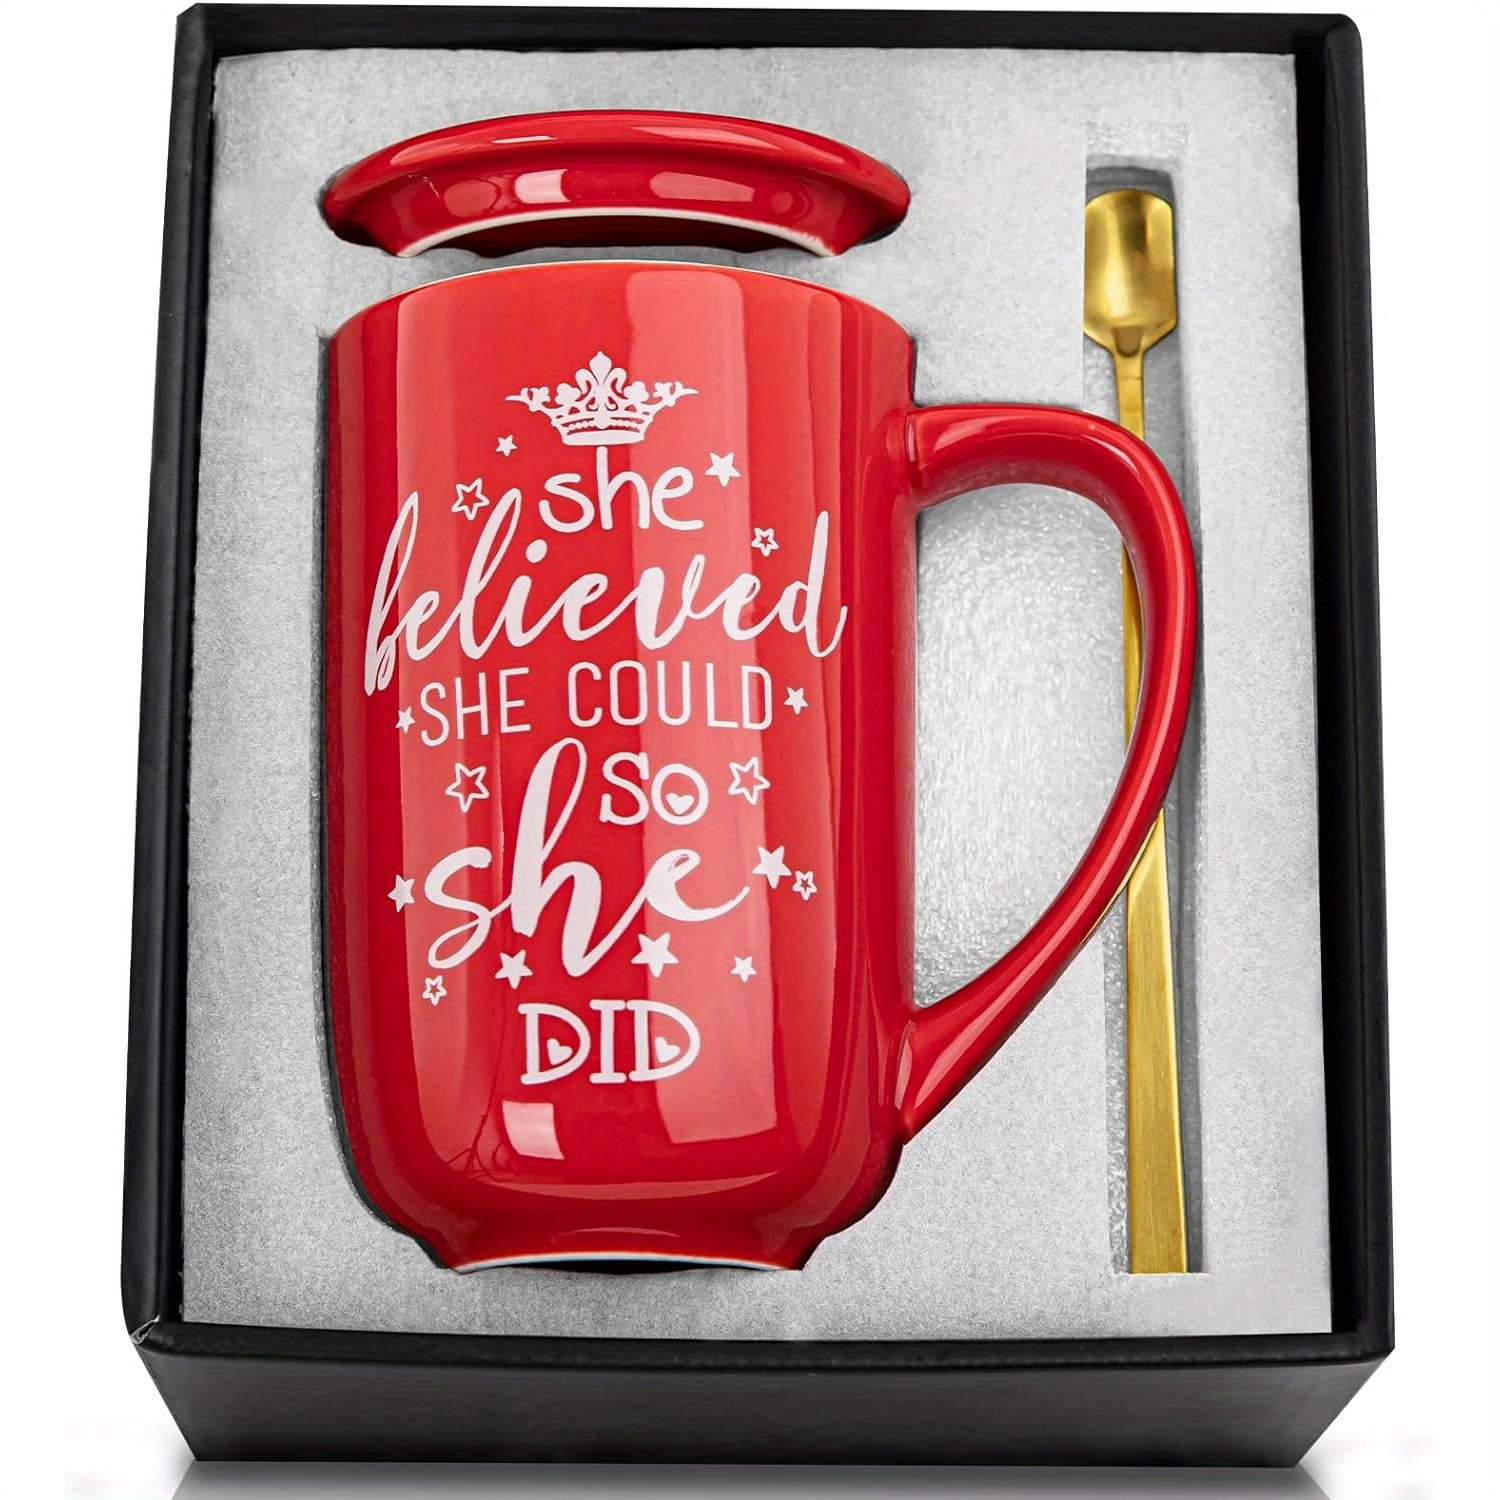 

Graduation Gifts For Her, Inspirational Congratulations Gifts For Women - She Believed She Could So She Did Mug - Valentines Day Gift For Female, 18oz Large Capacity Red Ceramic Coffee Cup, Gift Boxed